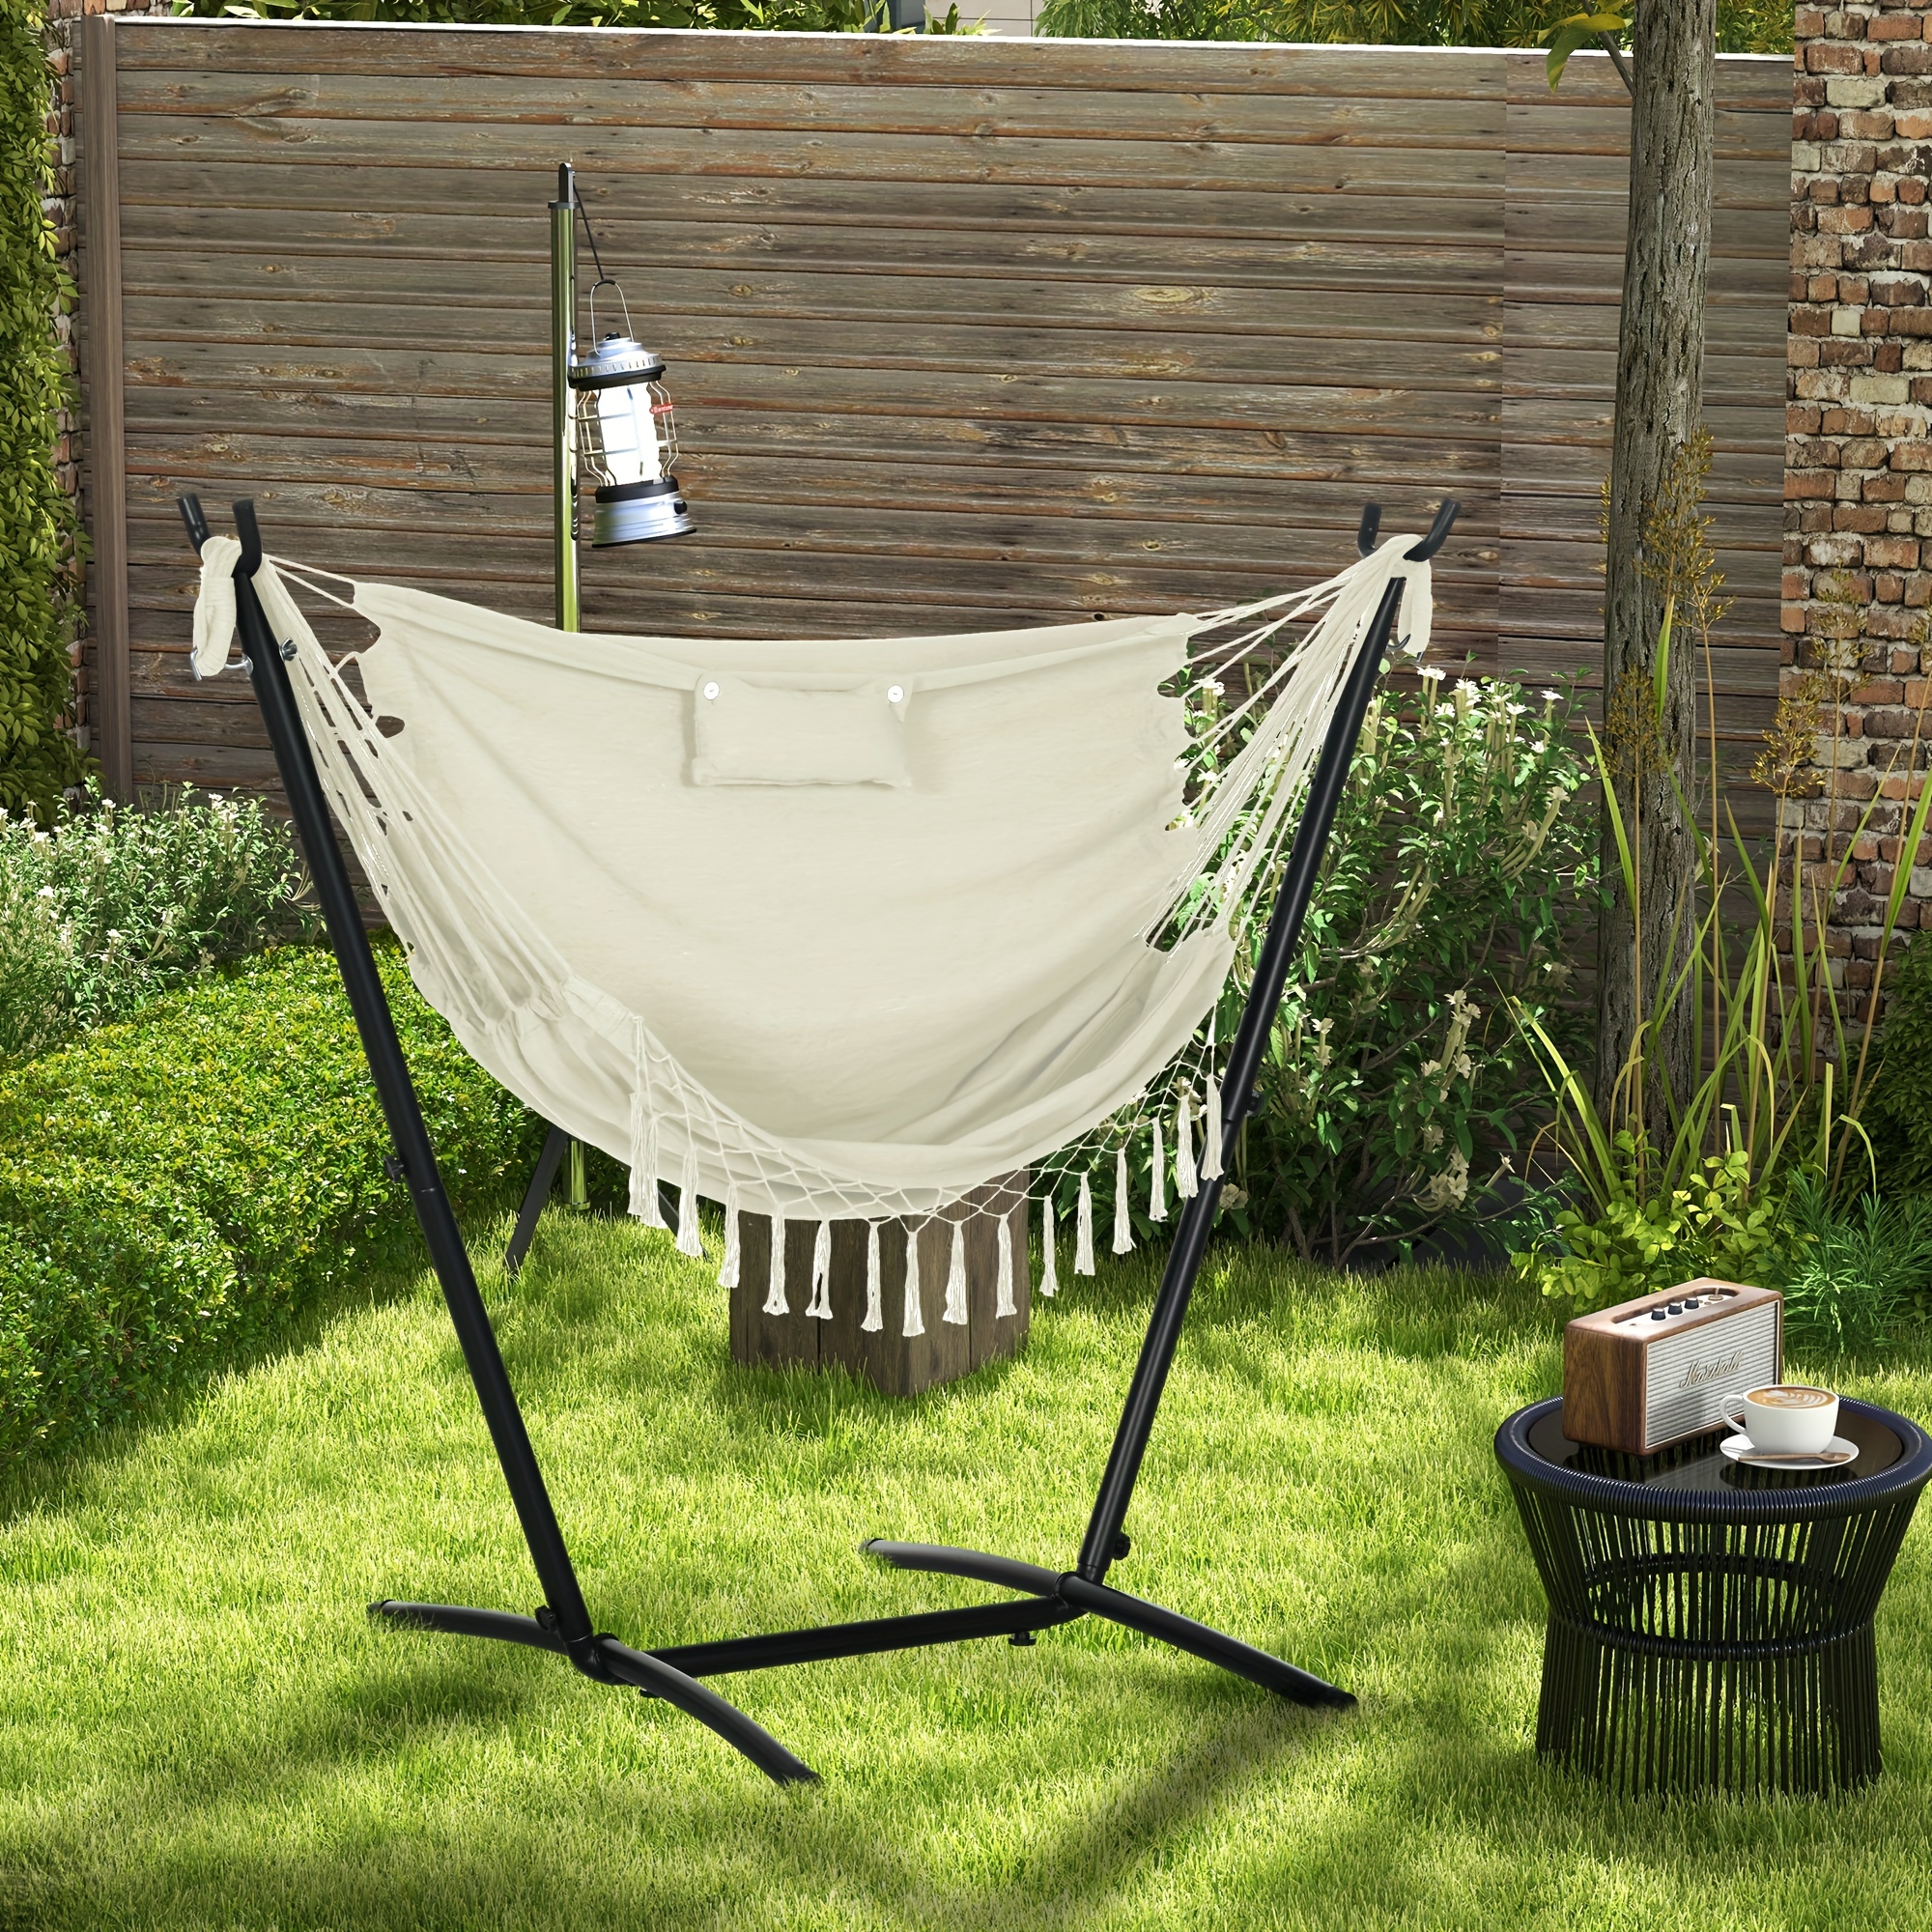 

Patio Hammock Chair With Stand, Outdoor Hammock Swing Hanging Lounge Chair With Side Pocket And Headrest, Cream White